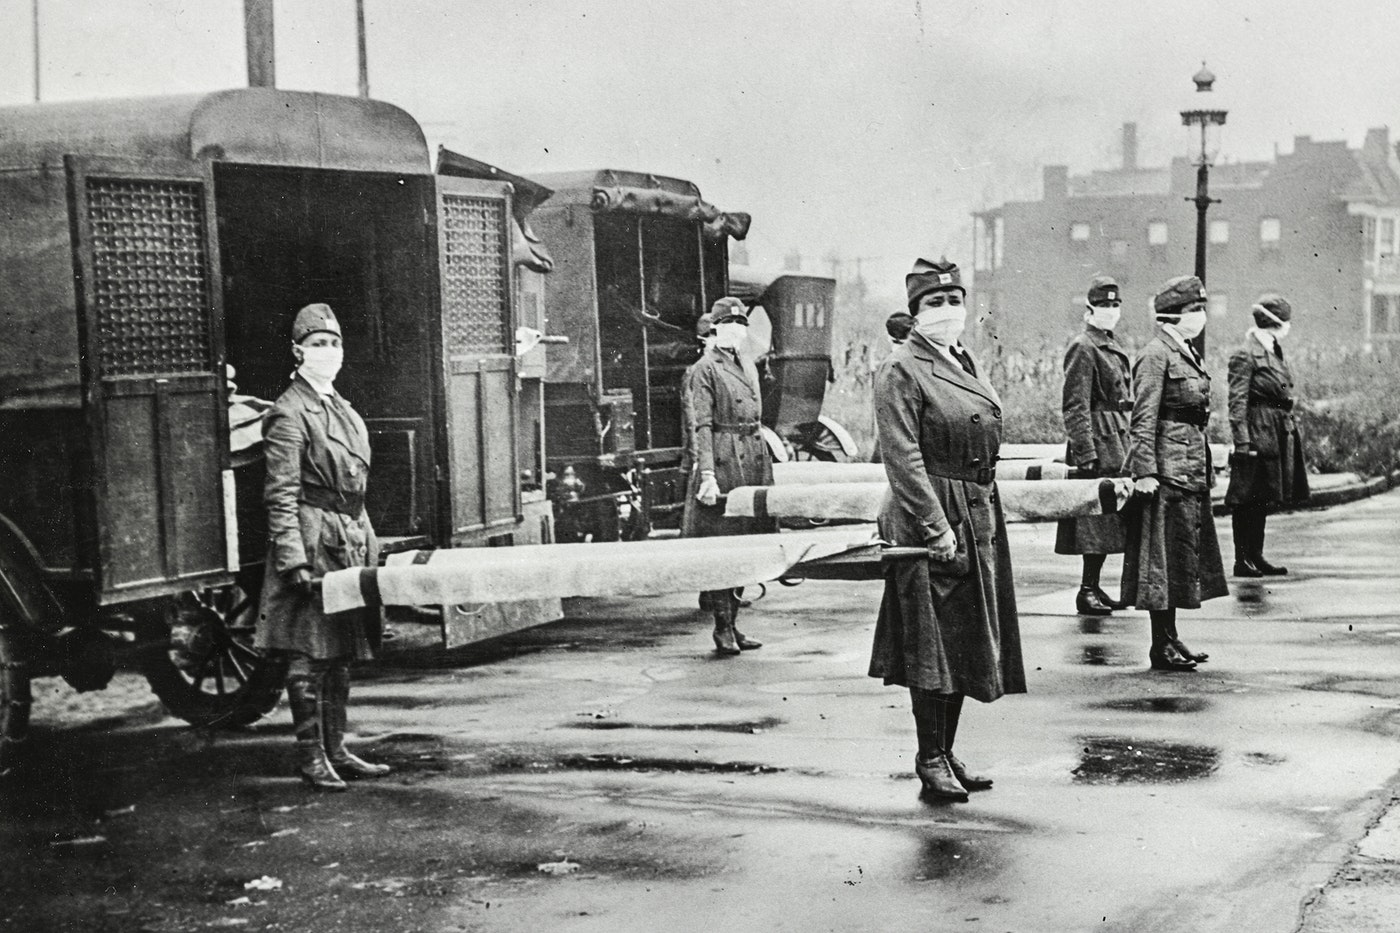 1918 influenza epidemic St. Louis Red Cross Motor Corps personnel wear masks as they hold stretchers next to ambulances in preparation for victims of the influenza epidemic in October 1918. (Library of Congress)